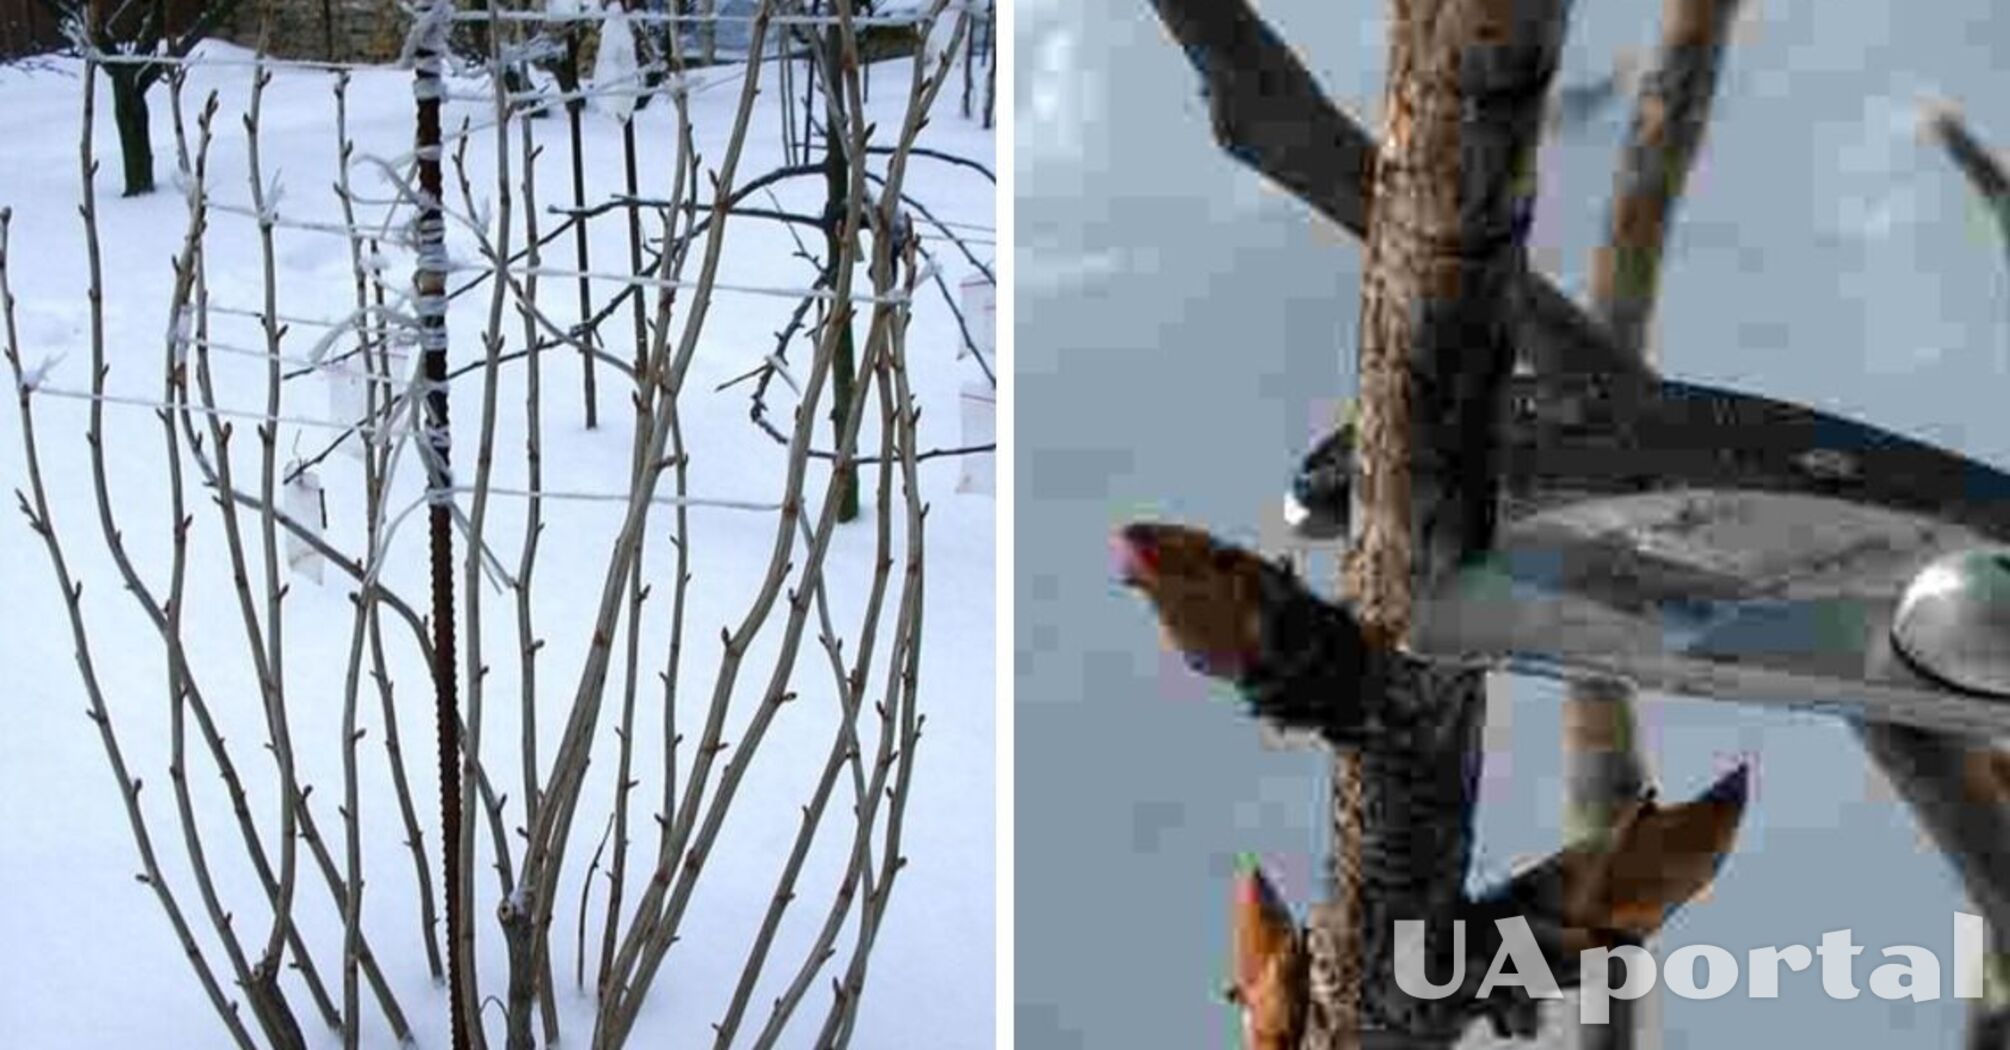 What to do with currant bushes in winter